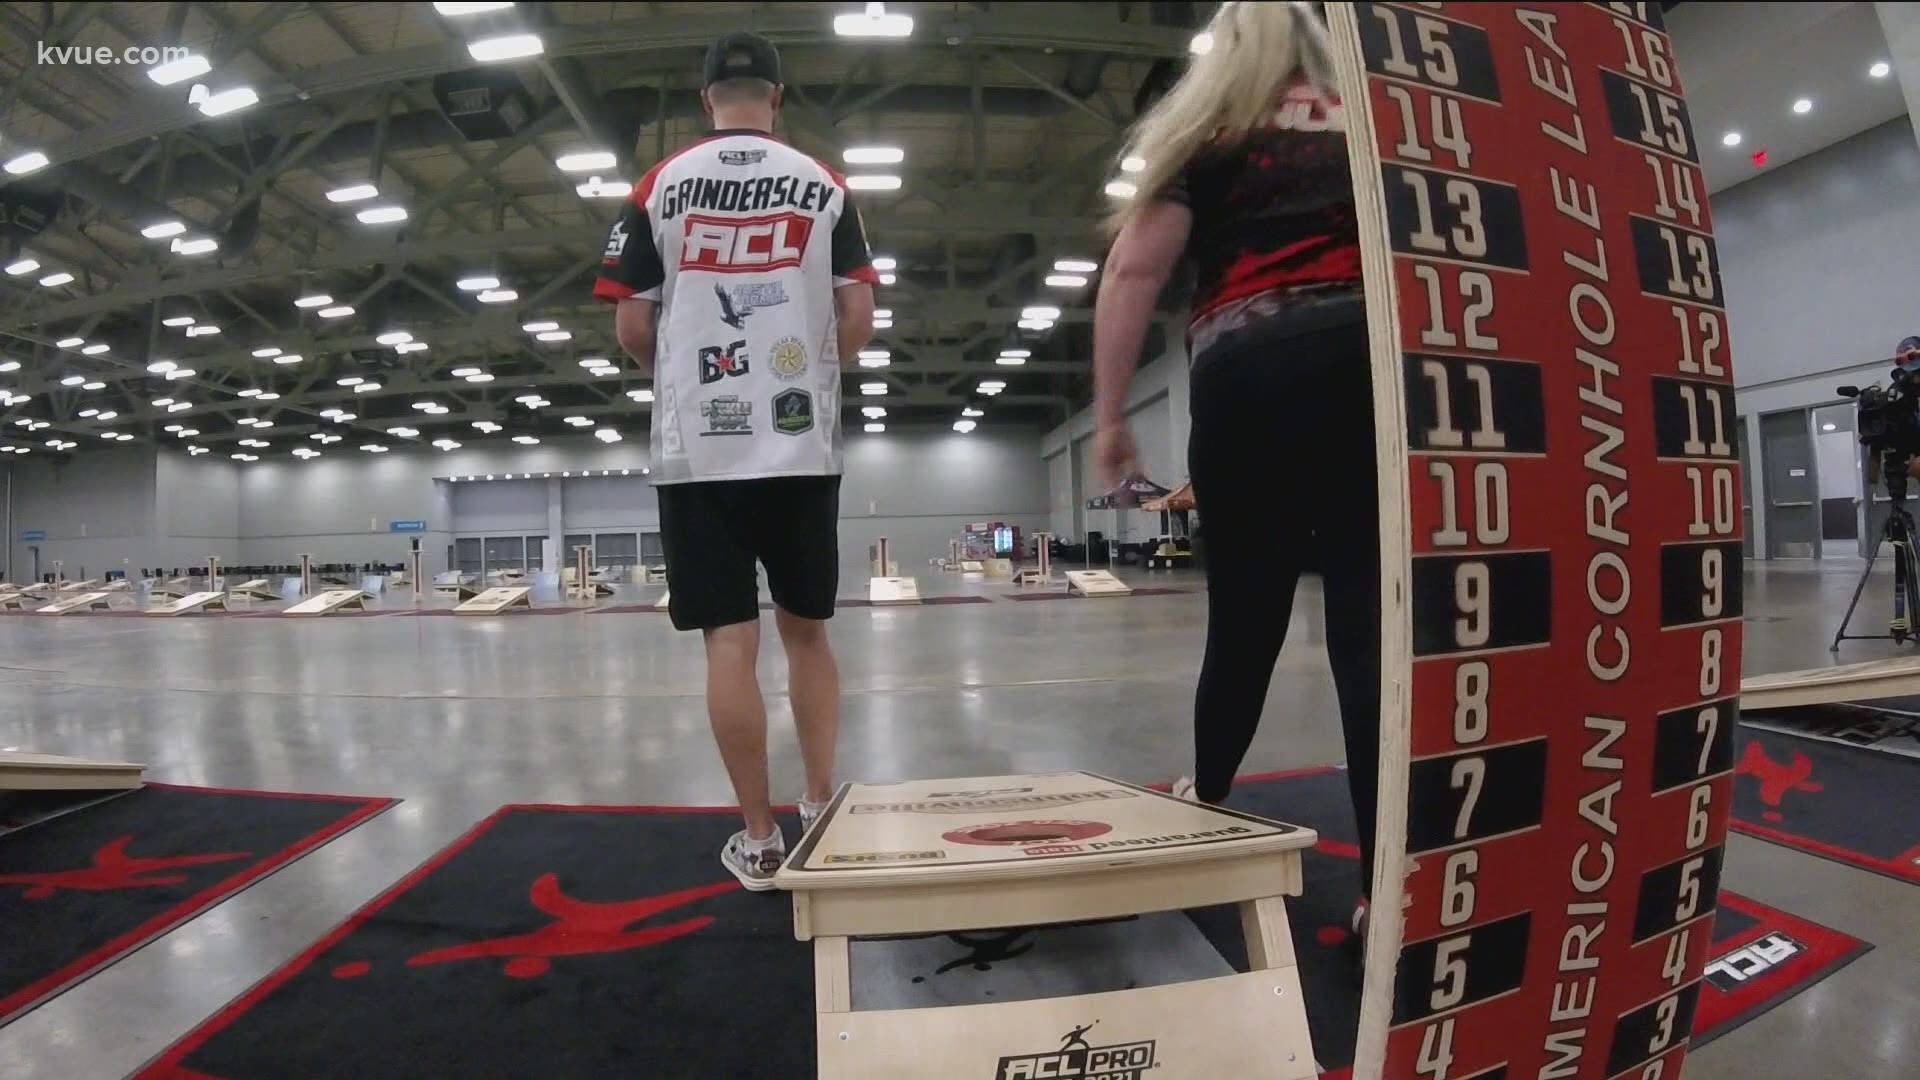 Hundreds of pros and amateurs will play cornhole at the Austin Convention Center this weekend.